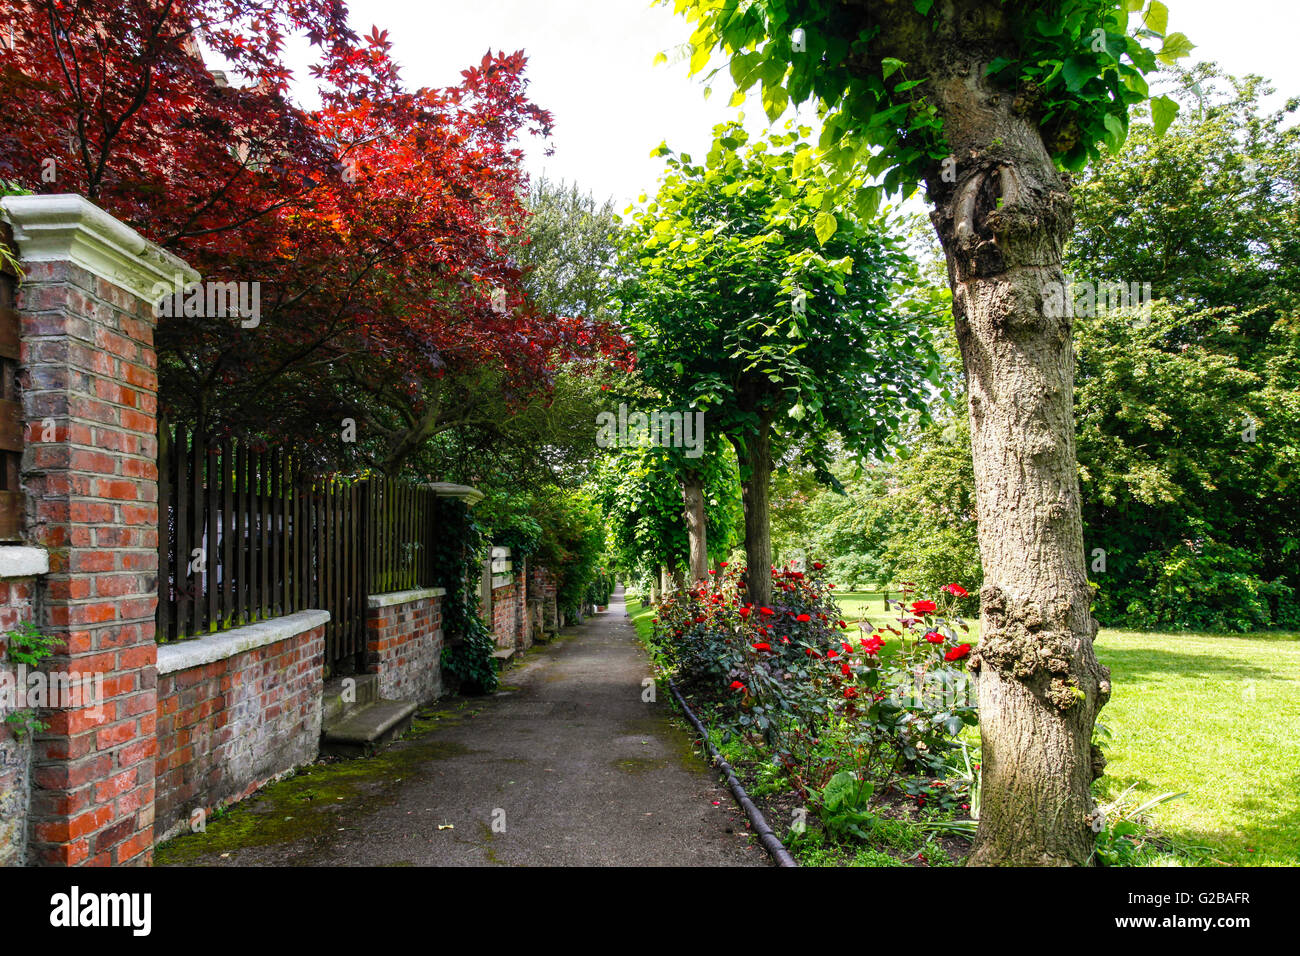 Greencroft Road. View of the pavement lined with trees and flowers. Stock Photo